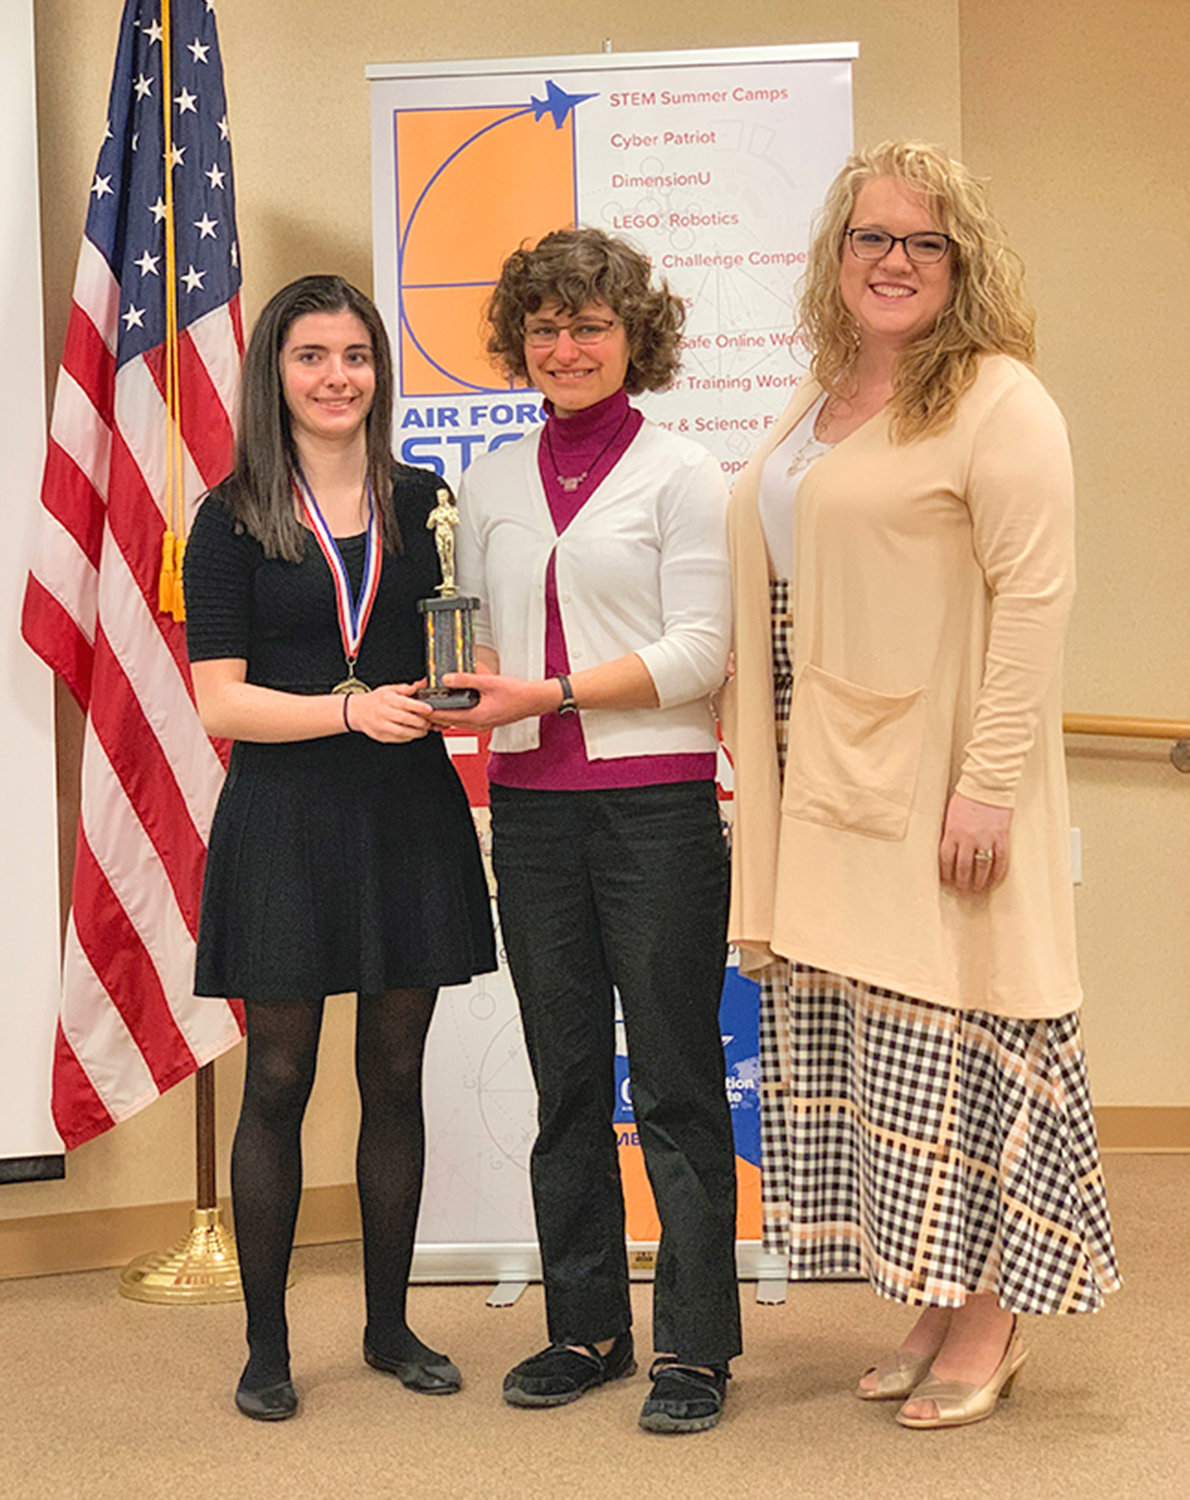 AFRL CHALLENGE COMPETITION WINNERS — Members of the Clinton High School team that won the AFRL (Air Force Research Laboratory) Challenge Competition, from left: students Jessica Ritz and Kim Rivera; and teacher Laura Broccoli.